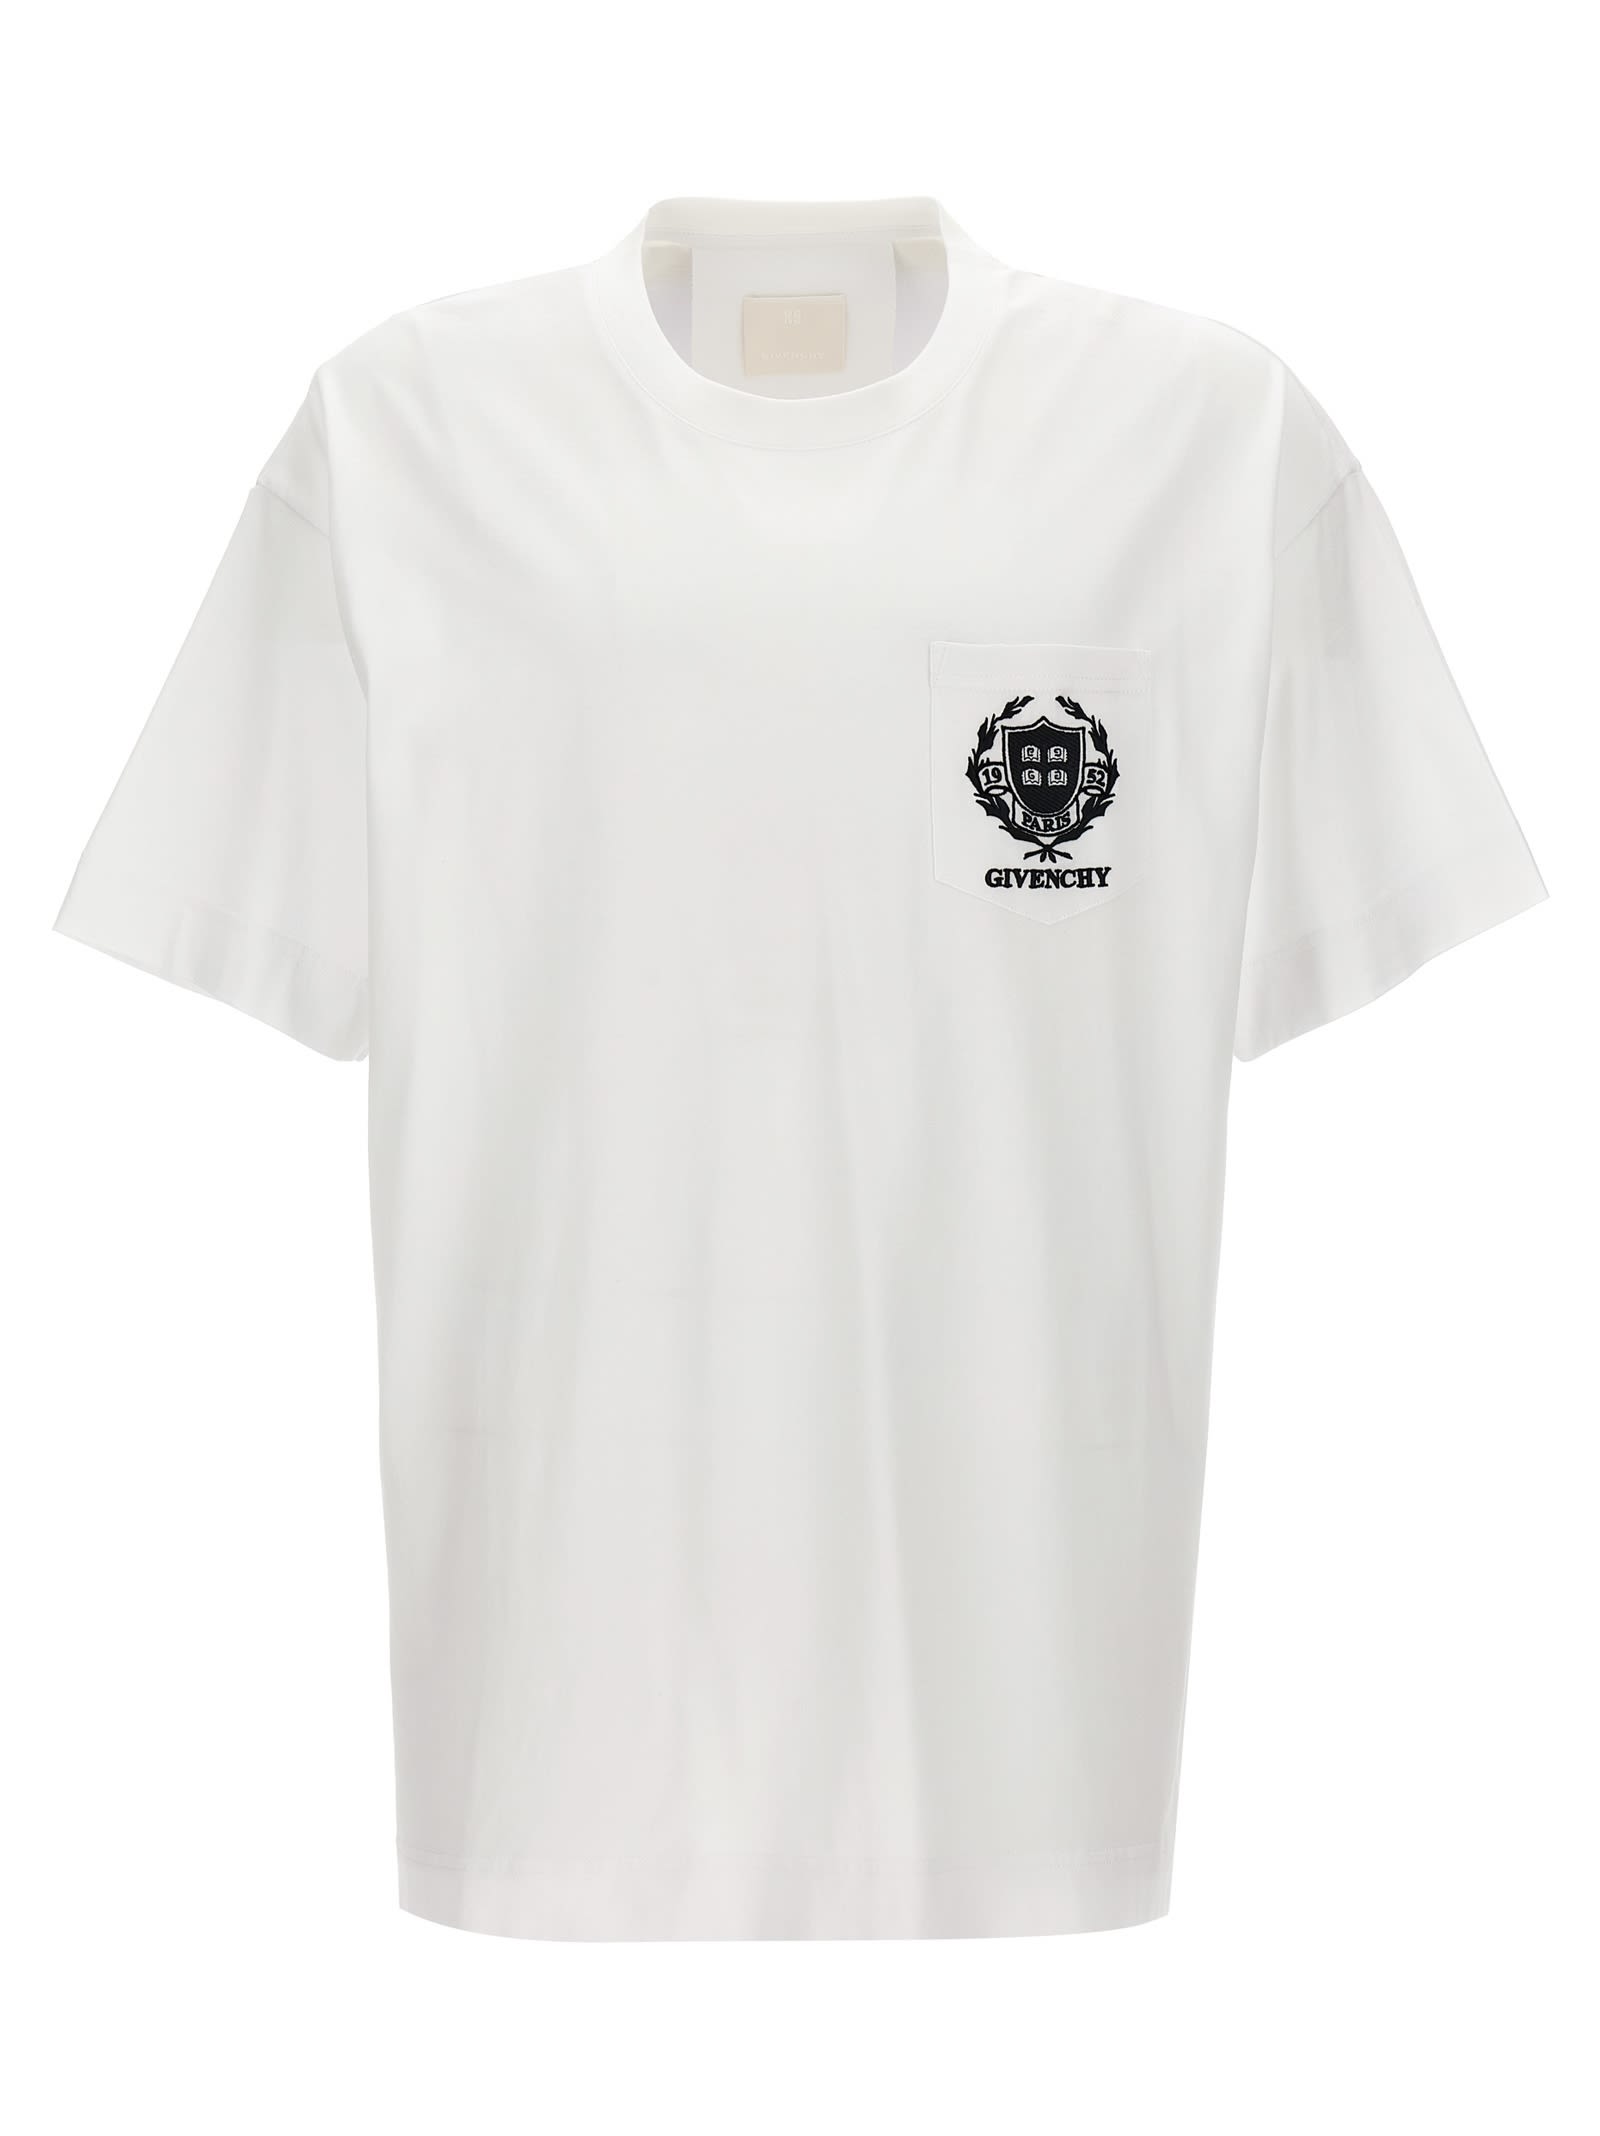 GIVENCHY LOGO EMBROIDERY T-SHIRT